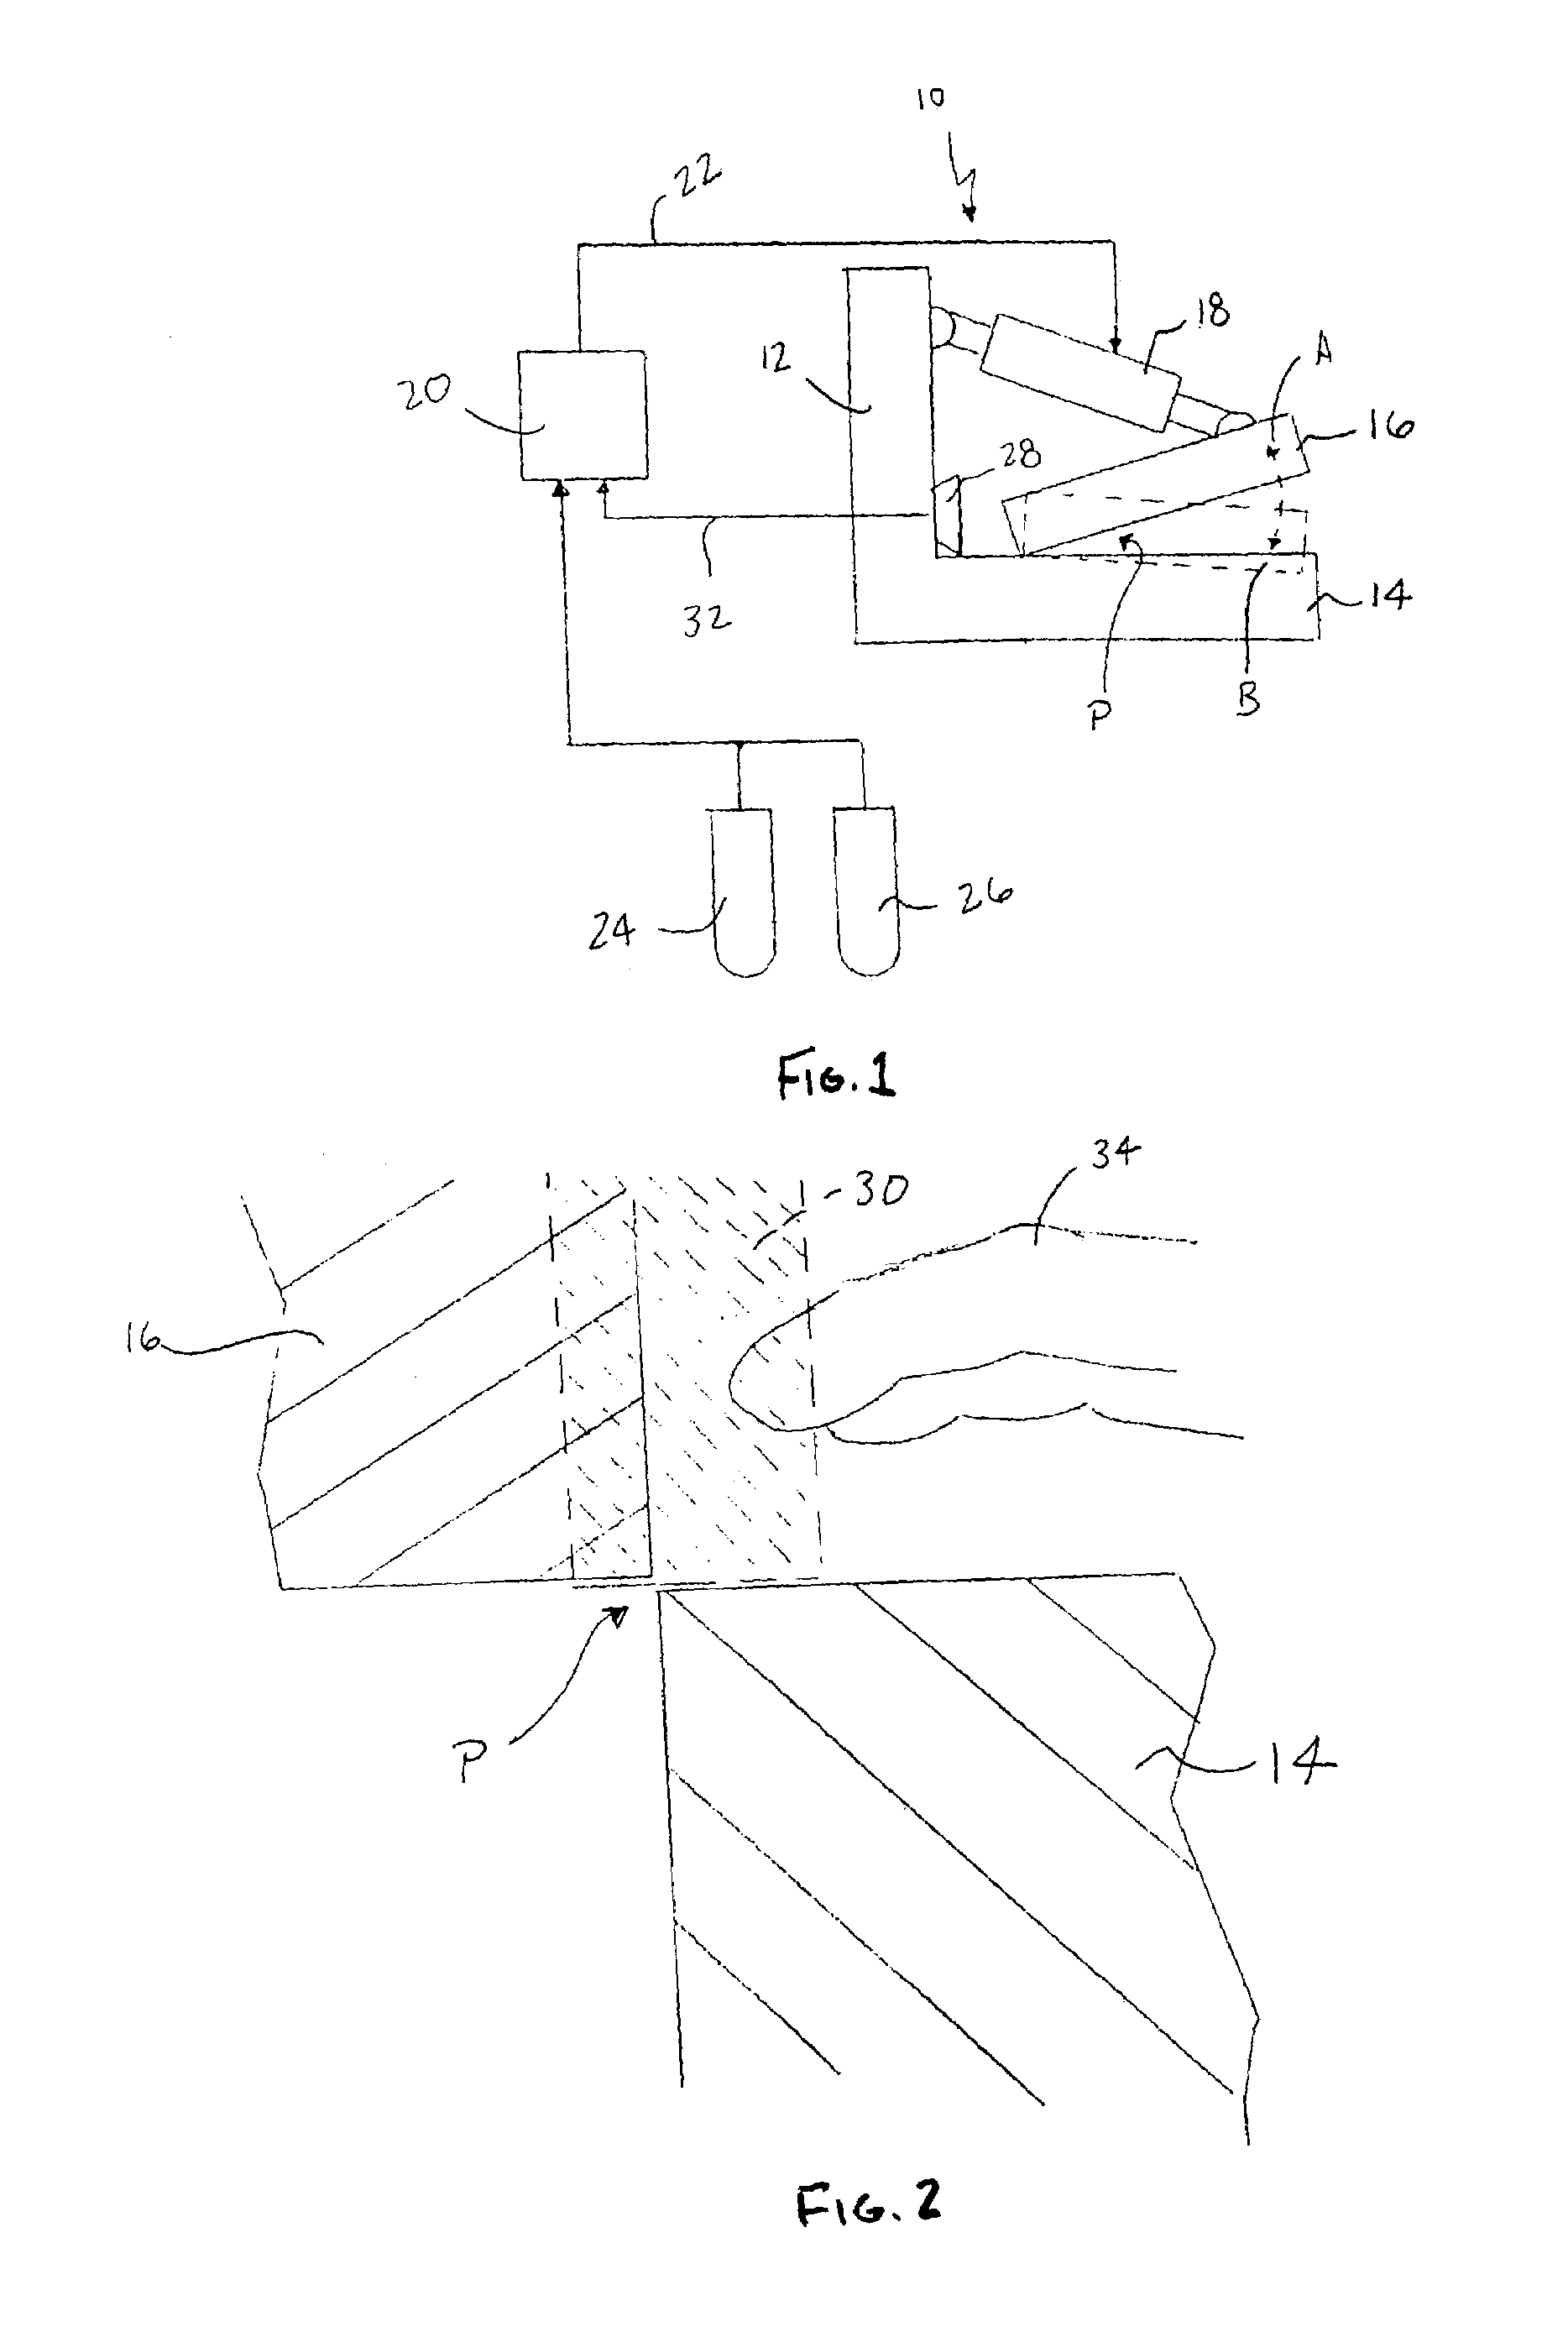 Safety-shutoff device for a manually fed processing machine